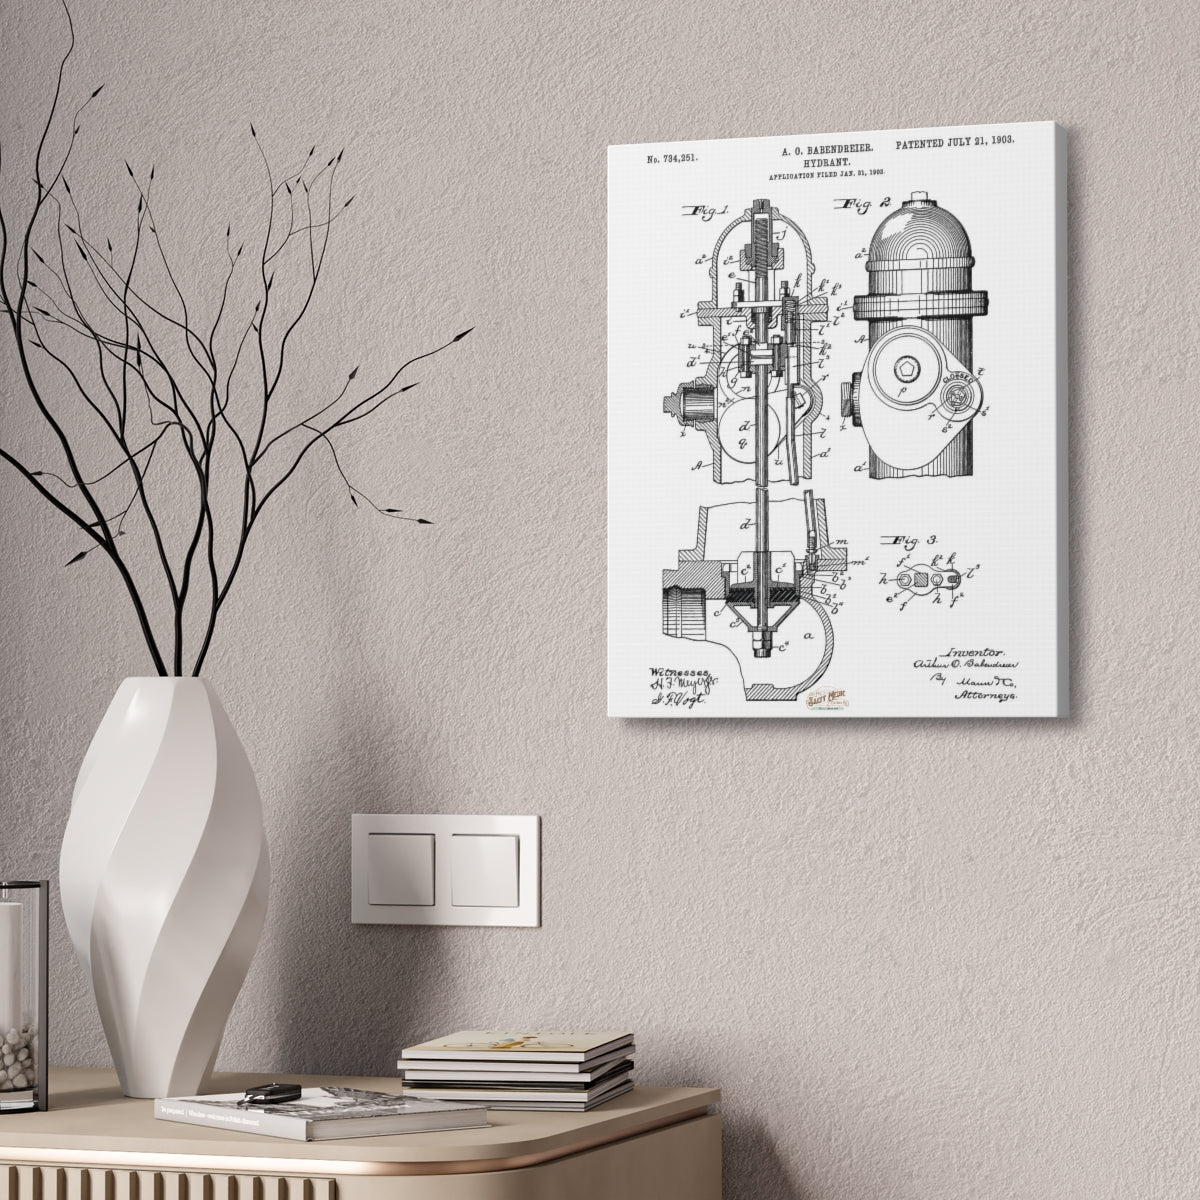 1903 Babendreier Fire Hydrant Patent Wall Art Stretched Canvas, 1.5'' - Salty Medic Clothing Co.